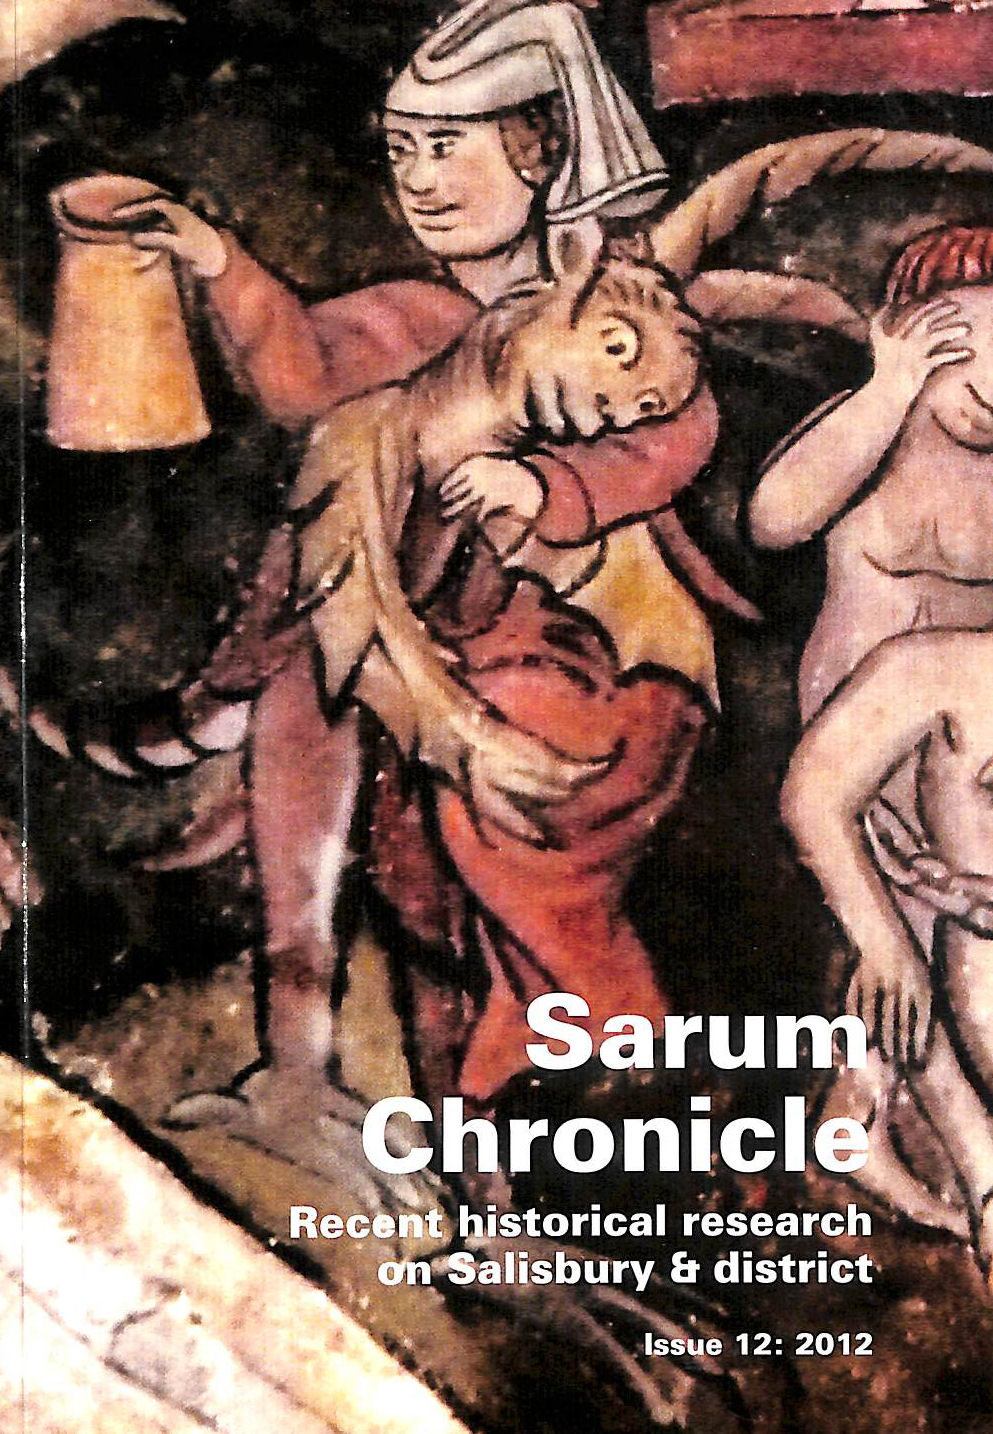 SARUM CHRONICLE - Sarum Chronicle: Recent historical research on Salisbury & District: Issue 12